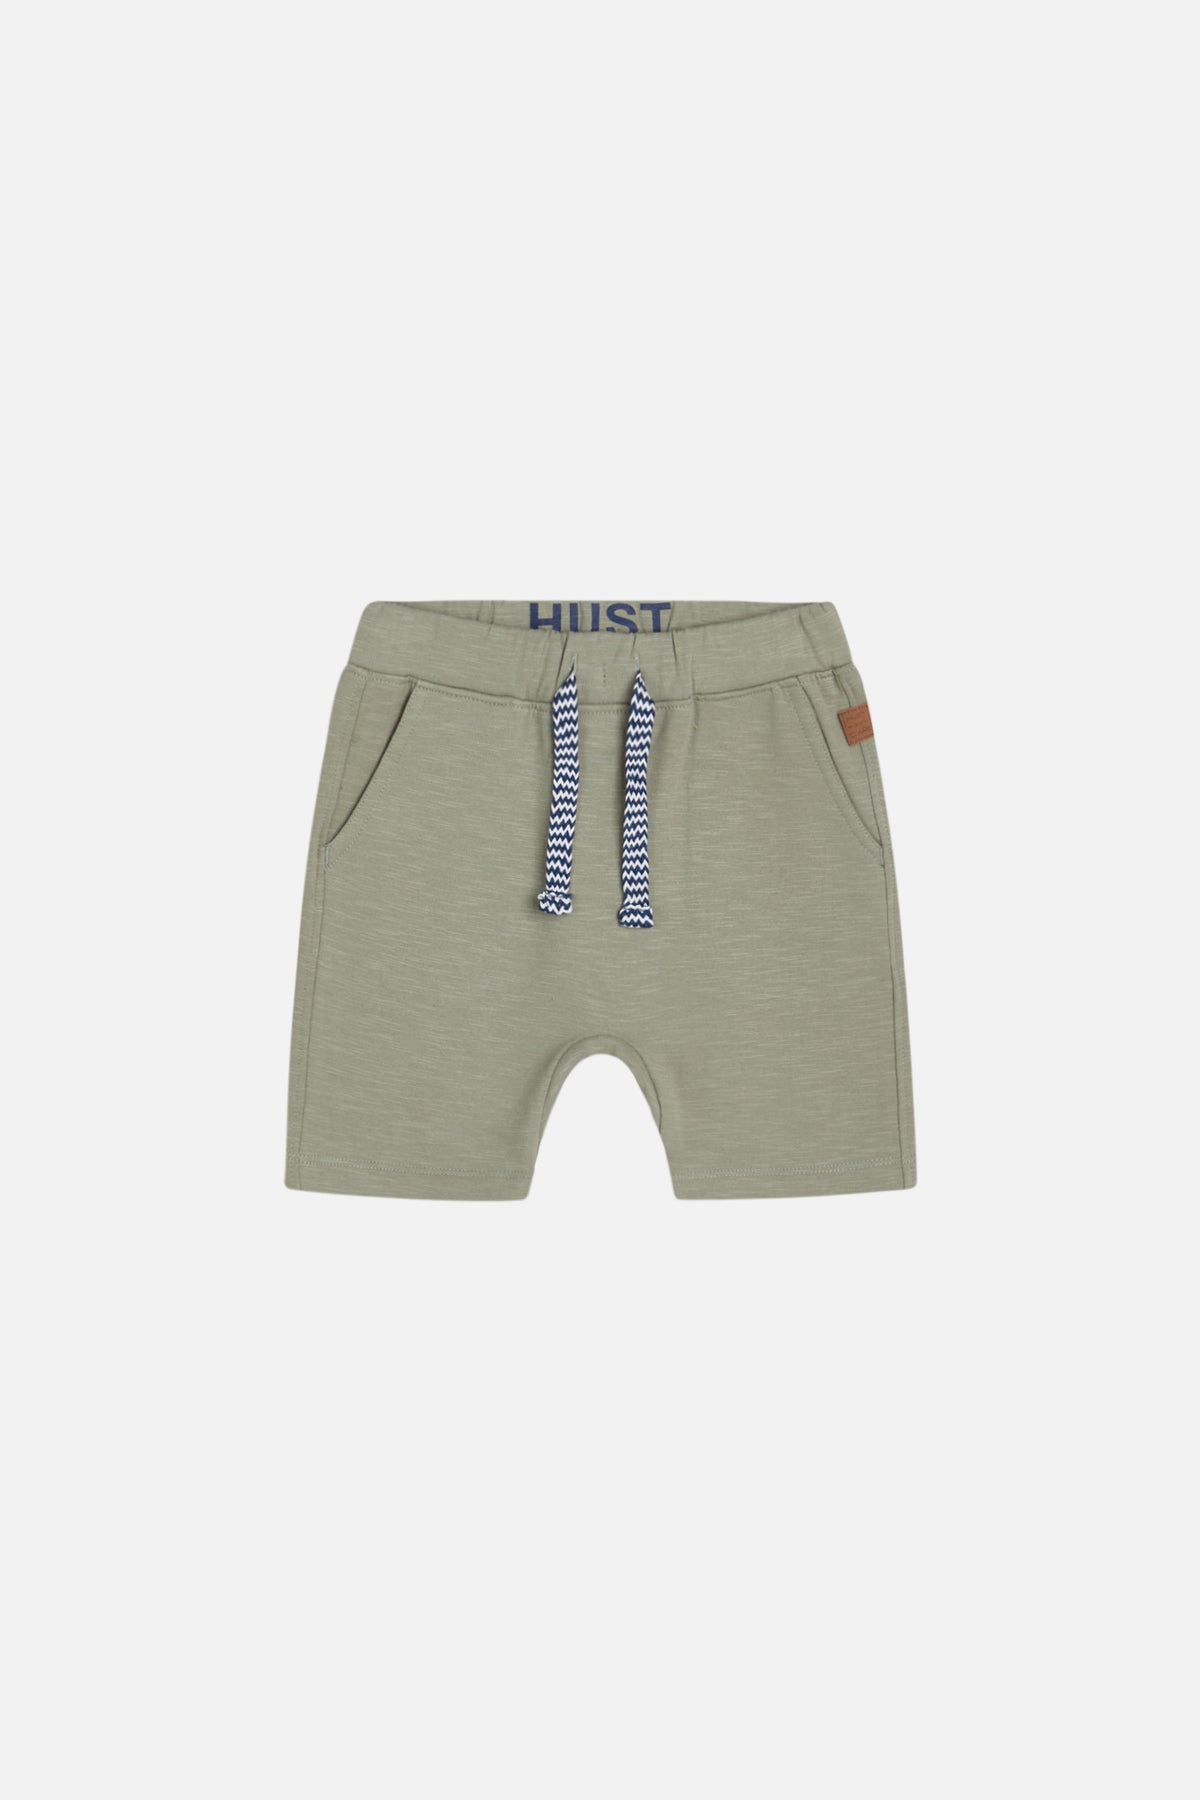 Hust and Claire - Heorg - HC Shorts - Seagrass